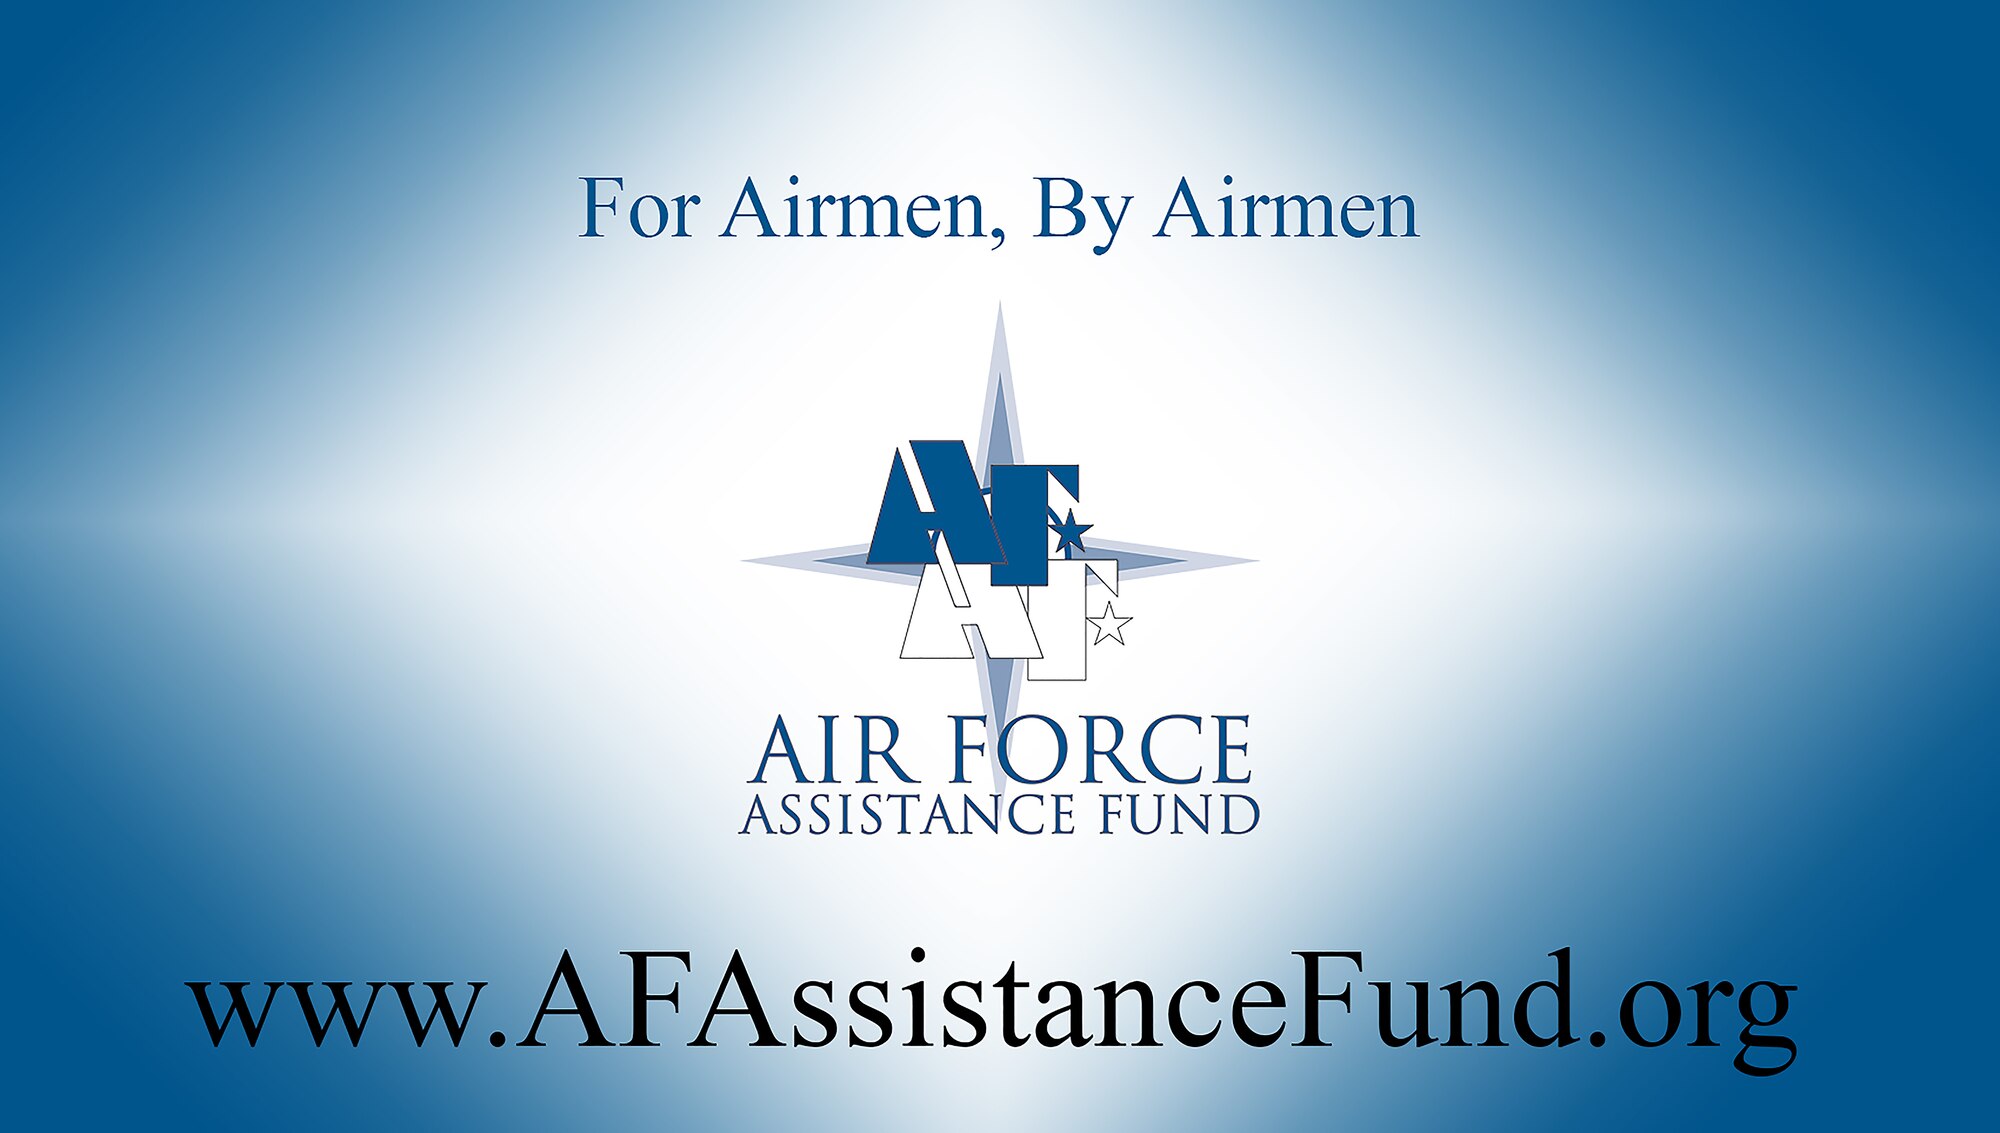 2019 AFAF to collect donations through April 26